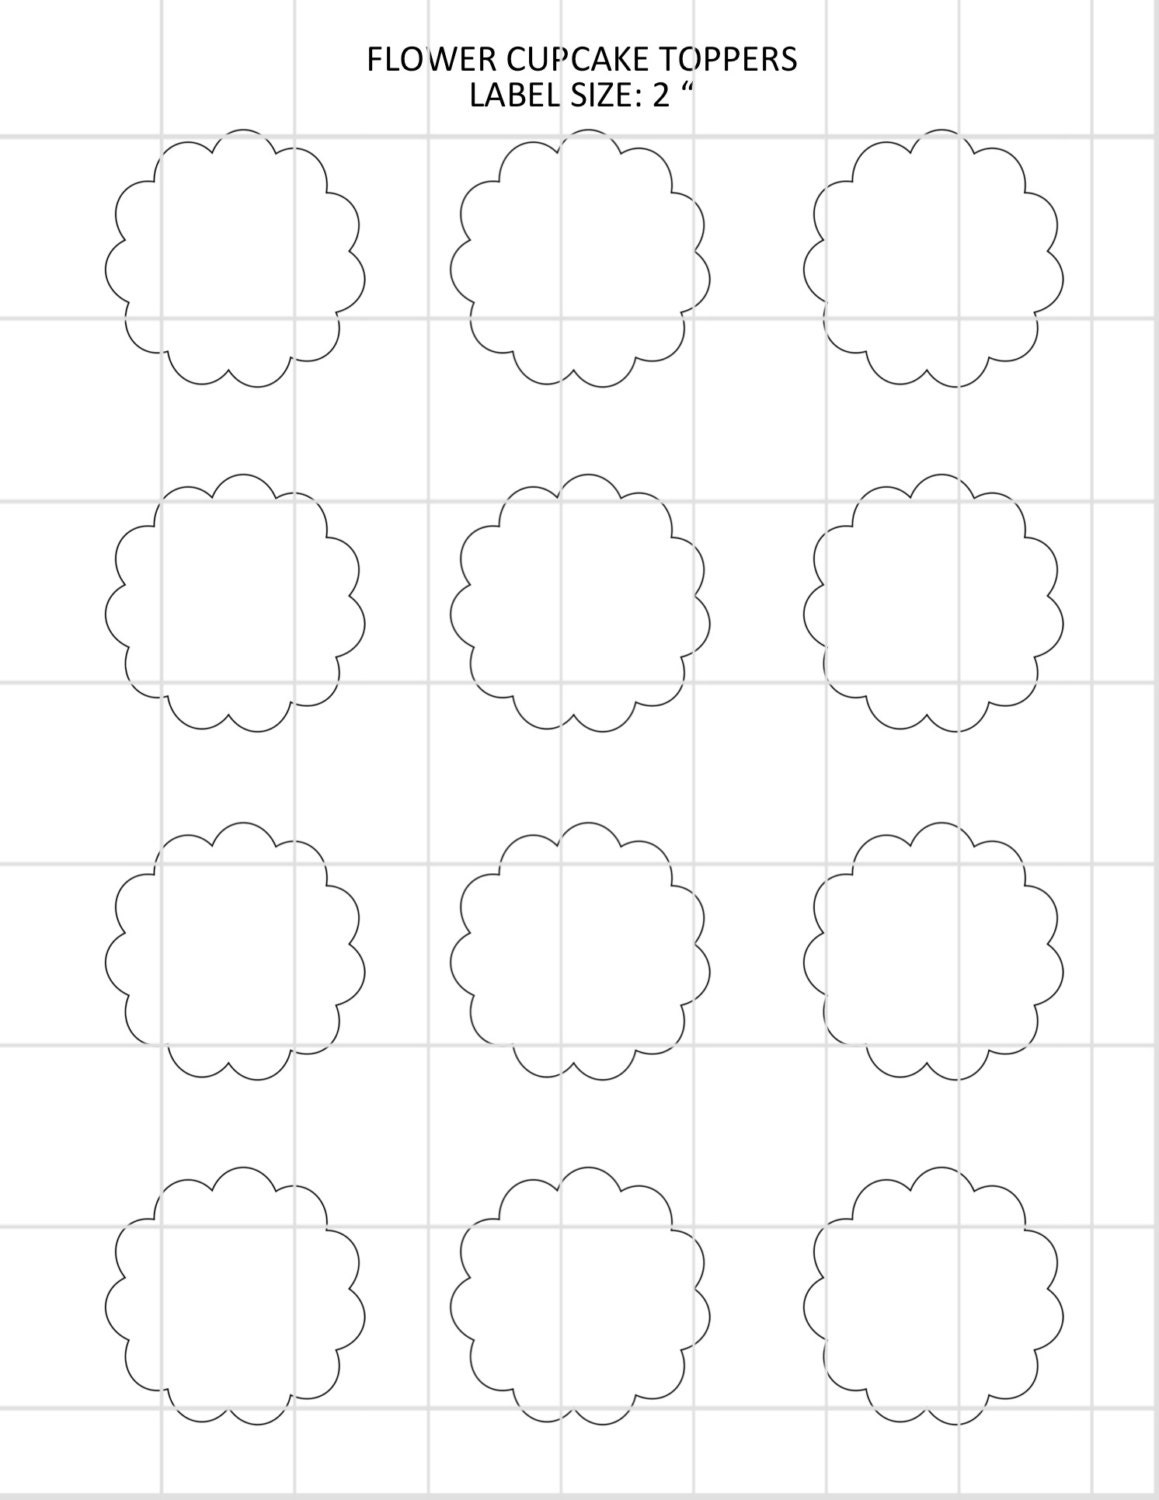 Download Flower cupcake toppers Template by AllDigitalCaleStore on Etsy